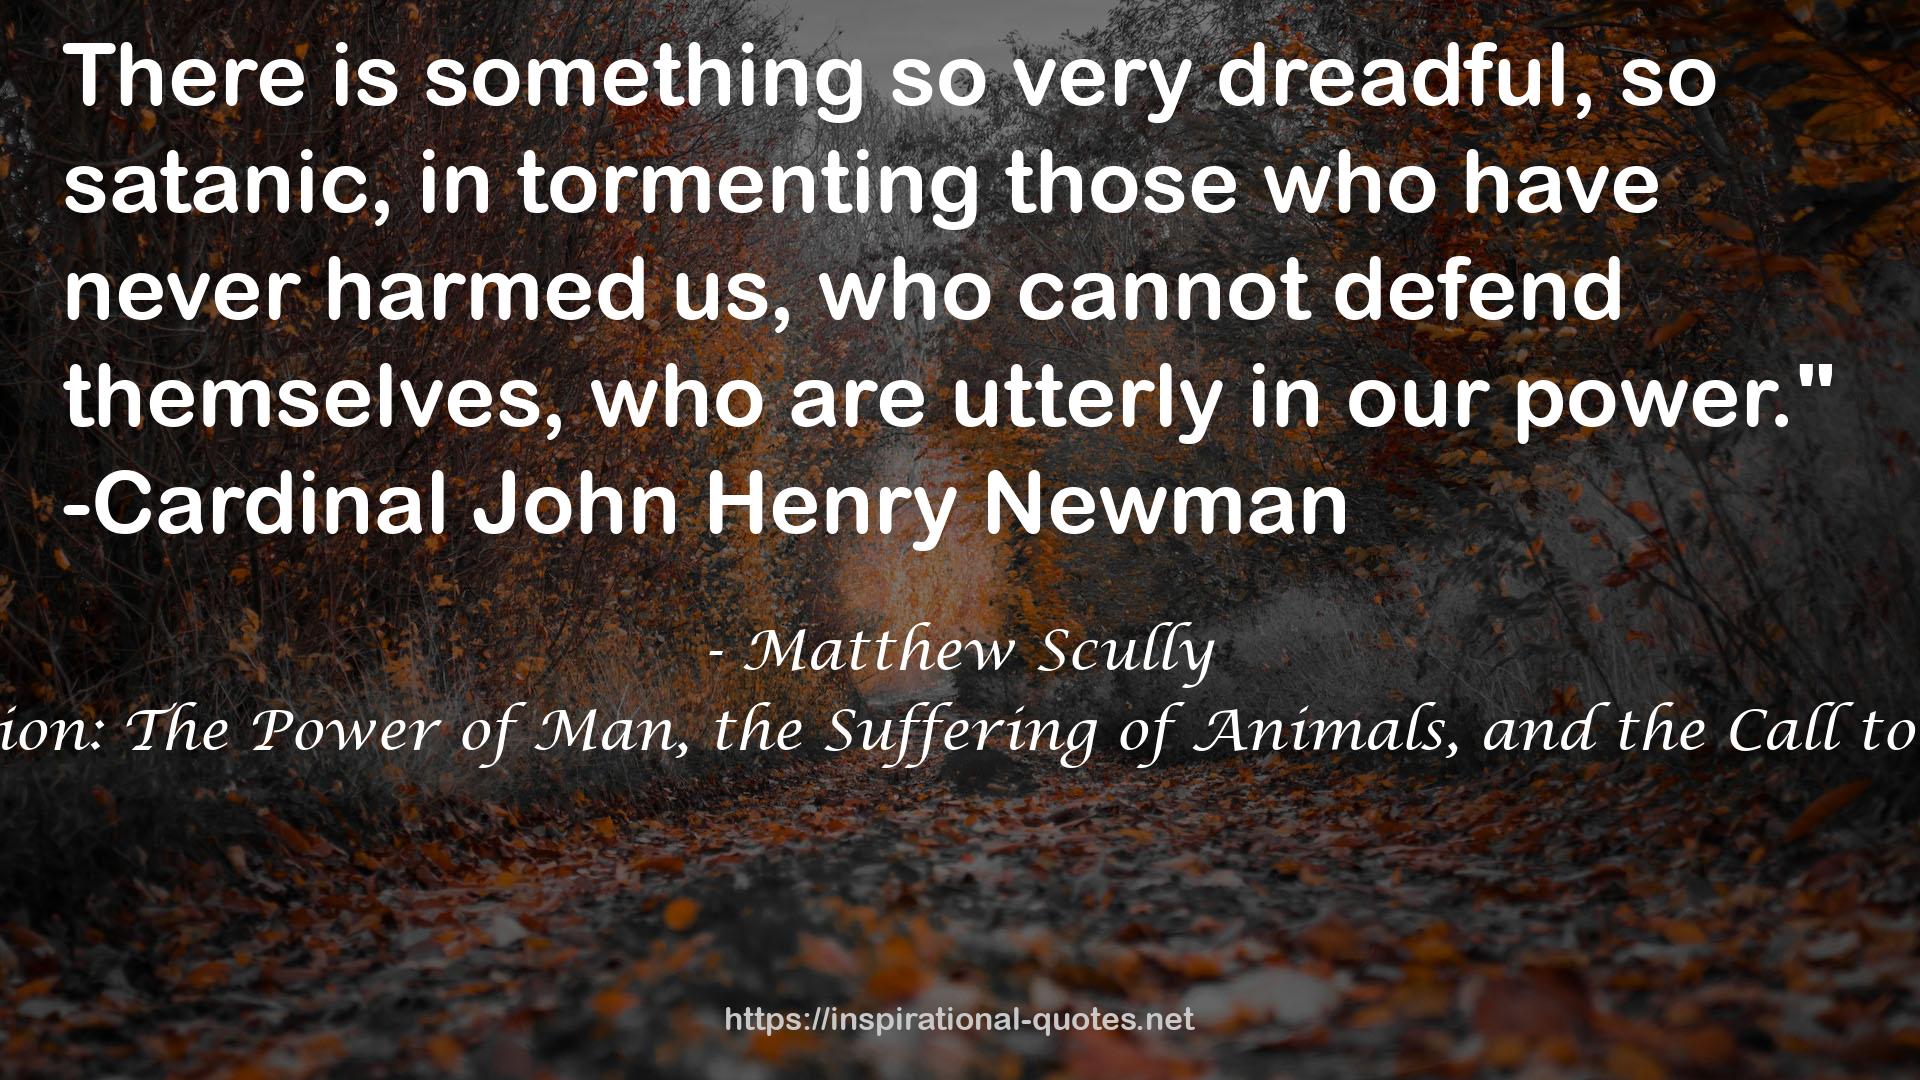 Matthew Scully QUOTES